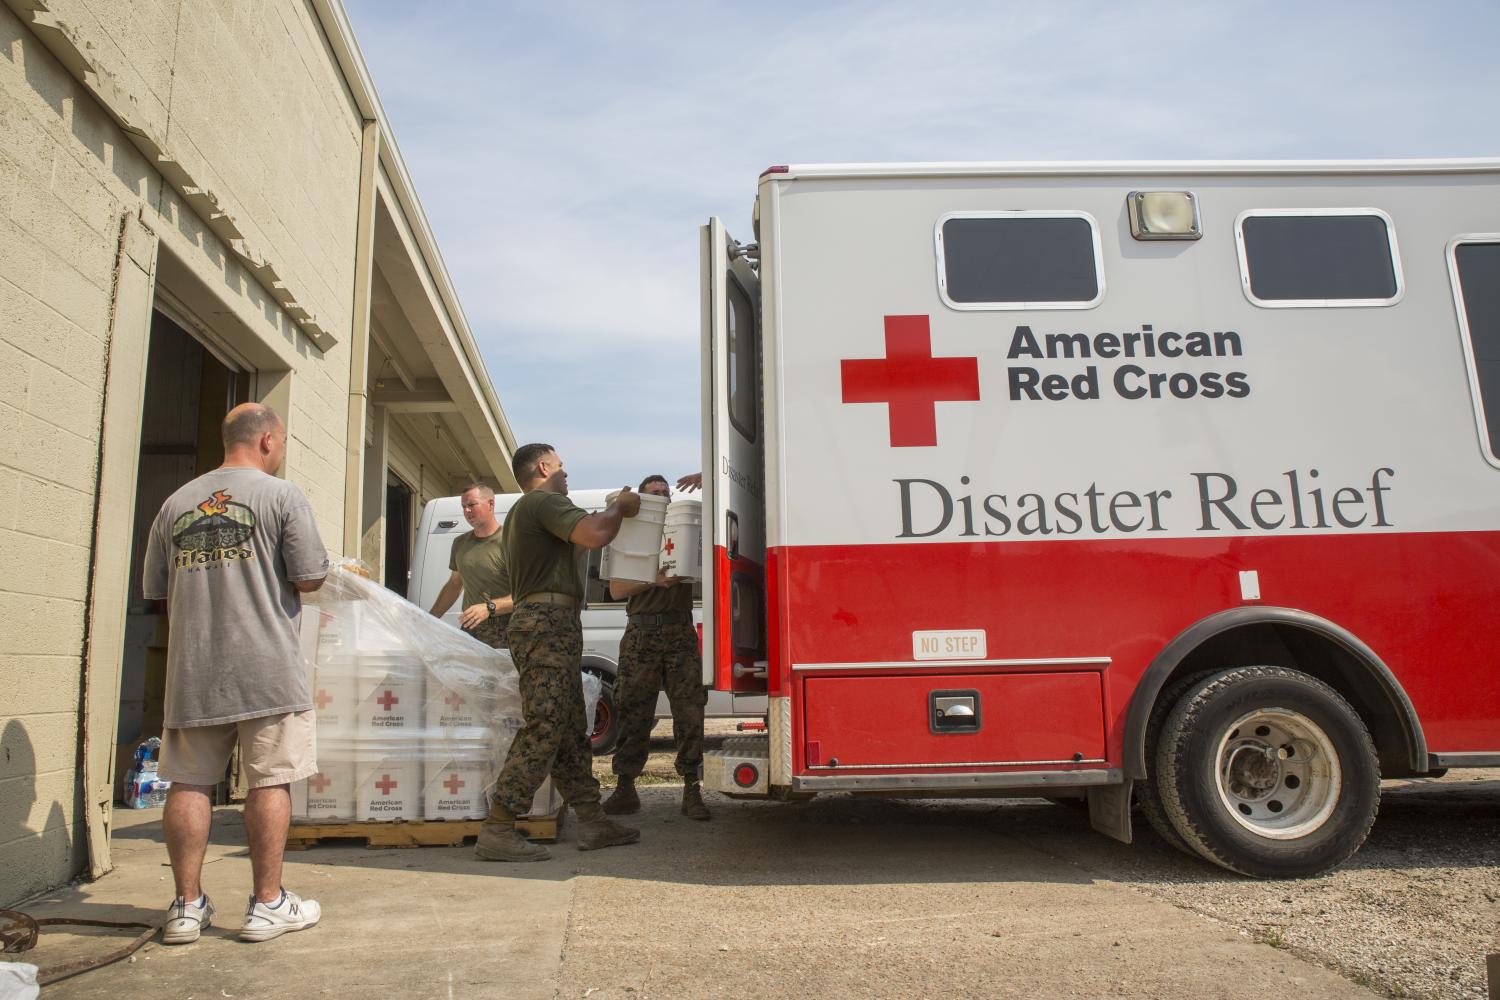 Marines+from+14th+Marine+Regiment%2C+4th+Marine+Division%2C+Marine+Forces+Reserve%2C+load+buckets+of+Red+Cross+cleaning+supplies+onto+an+American+Red+Cross+Disaster+Relief+Van+at+Red+Cross+warehouse+in+Beaumont%2C+Texas%2C+Sept.+3%2C+2017.